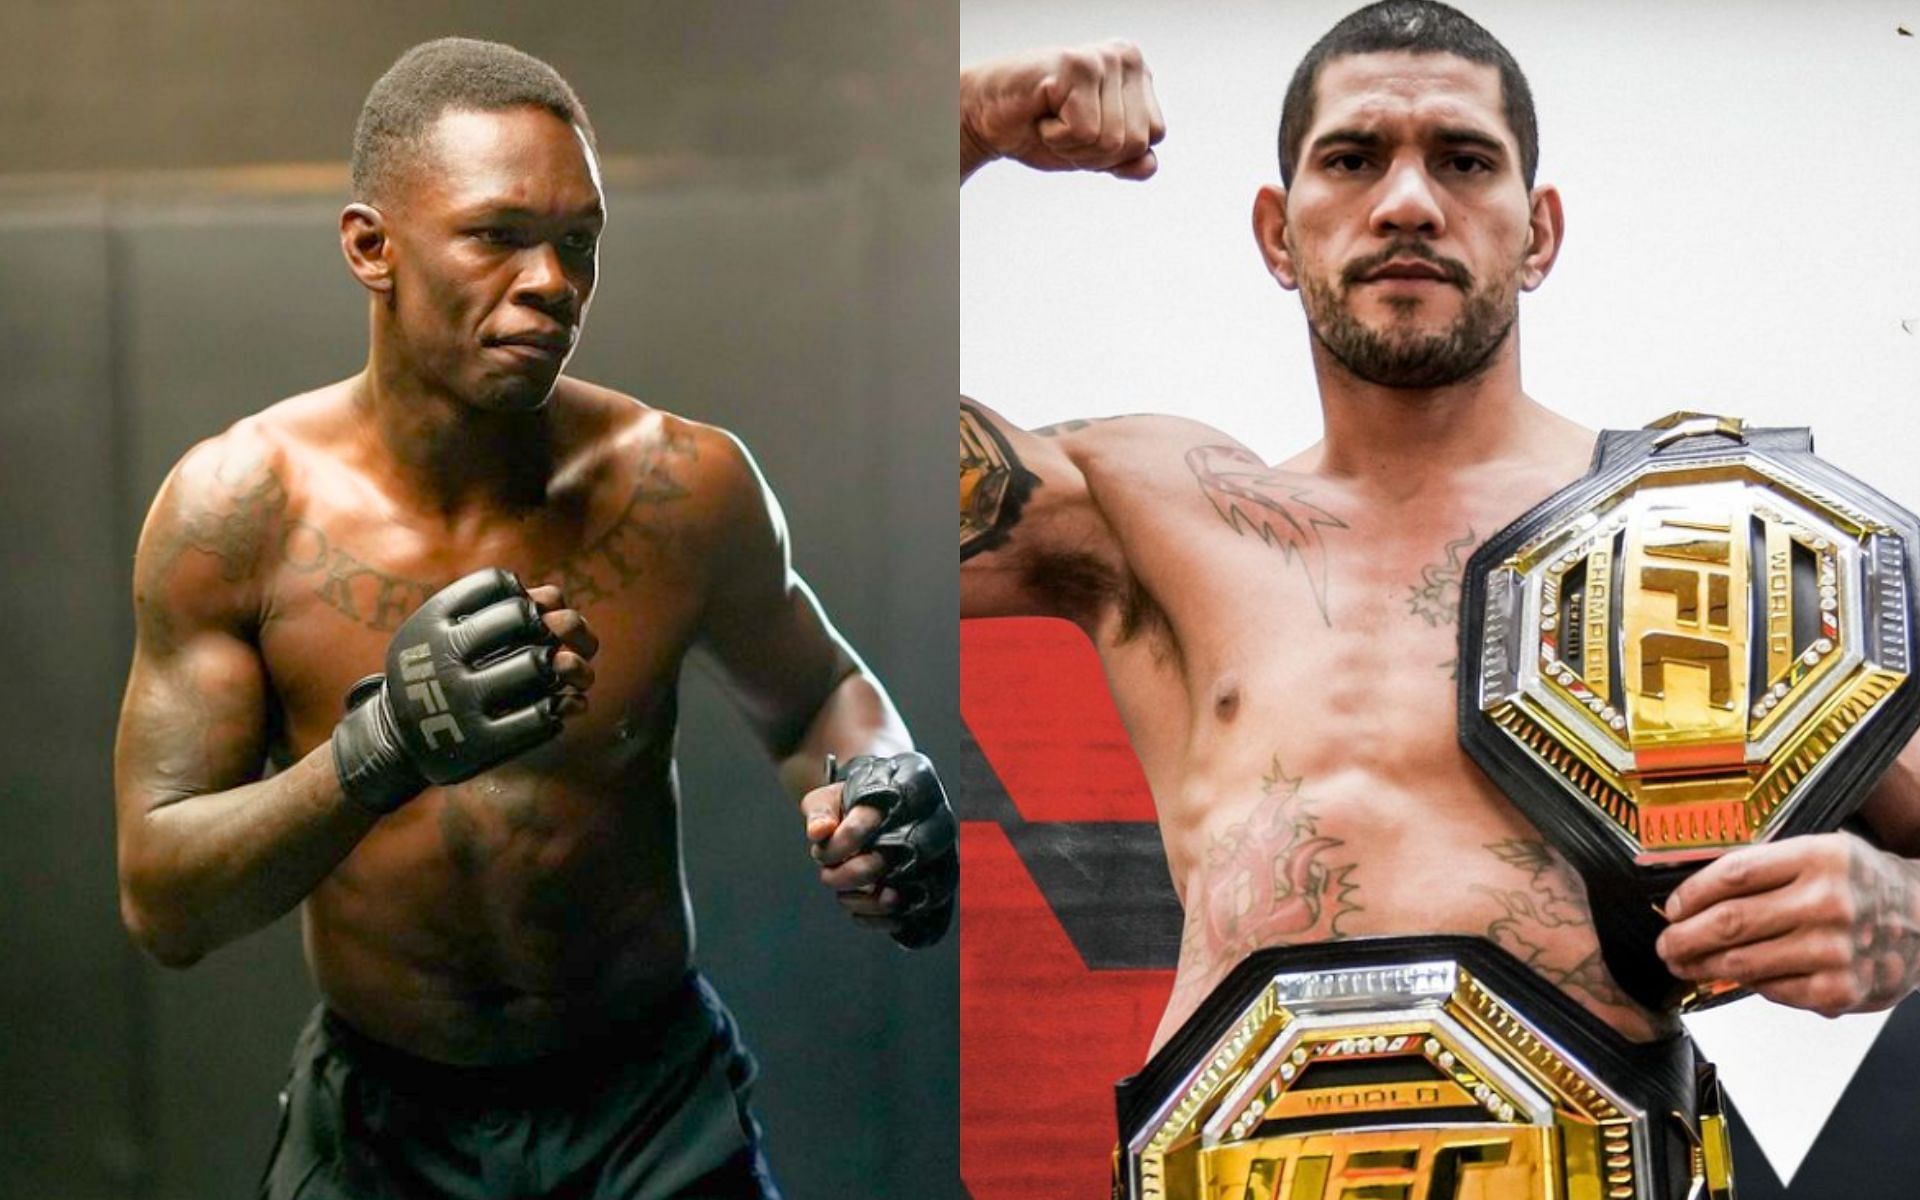 Israel Adesanya (left) and Alex Pereira (right) could headline UFC 300 according to Michael Bisping [Images Courtesy: @engage and @alexpoatanpereira on Instagram]